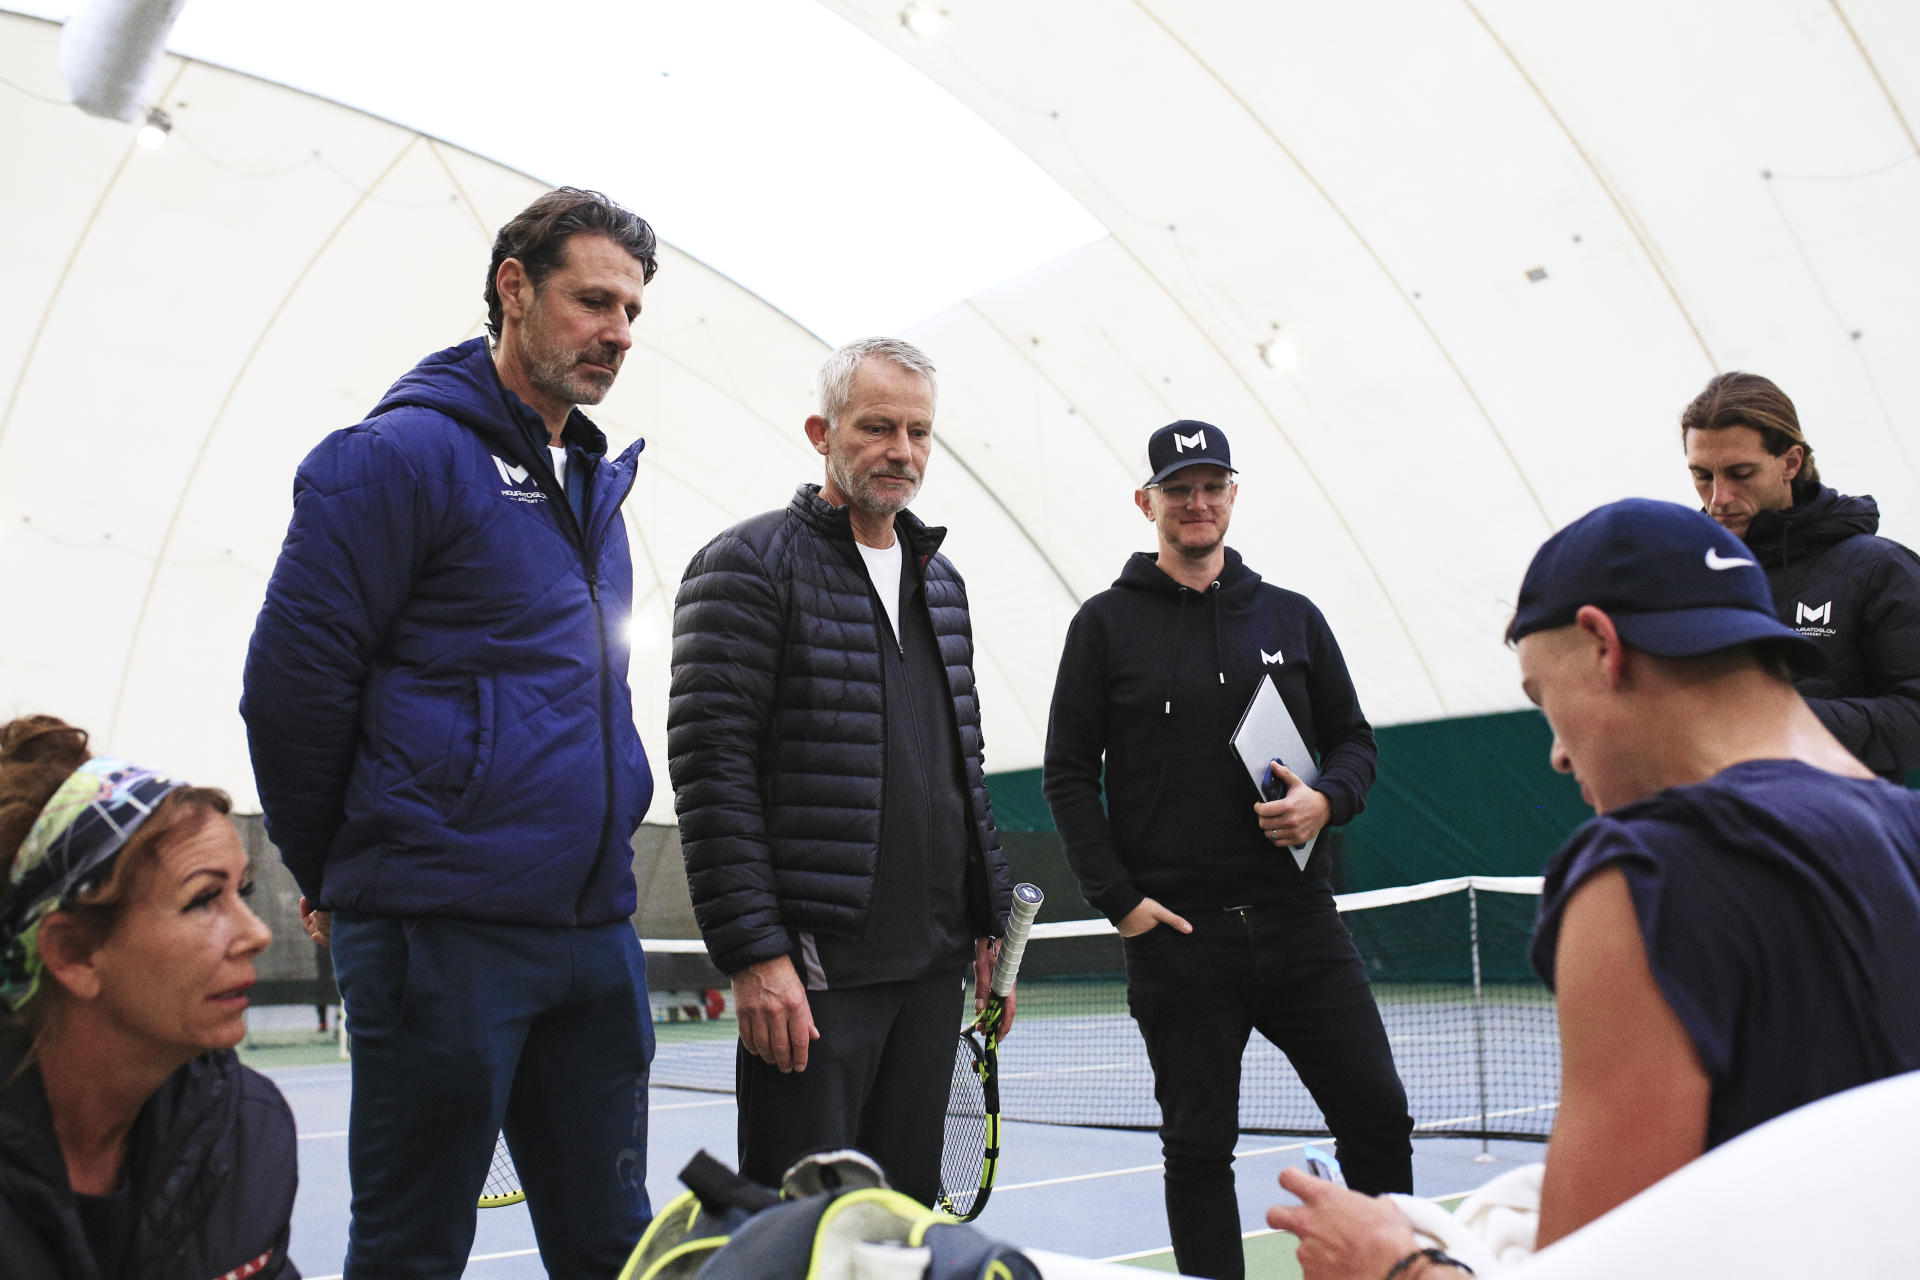 Holger Rune in training at the Mouratoglou Tennis Academy, in Biot (Alpes-Maritimes), on December 8, 2022. From left to right: Aneke Rune, Patrick Mouratoglou, his coach, Lars Christensen, his historic coach, Mike James, data analyst, and Lapo Becherini, physical trainer.